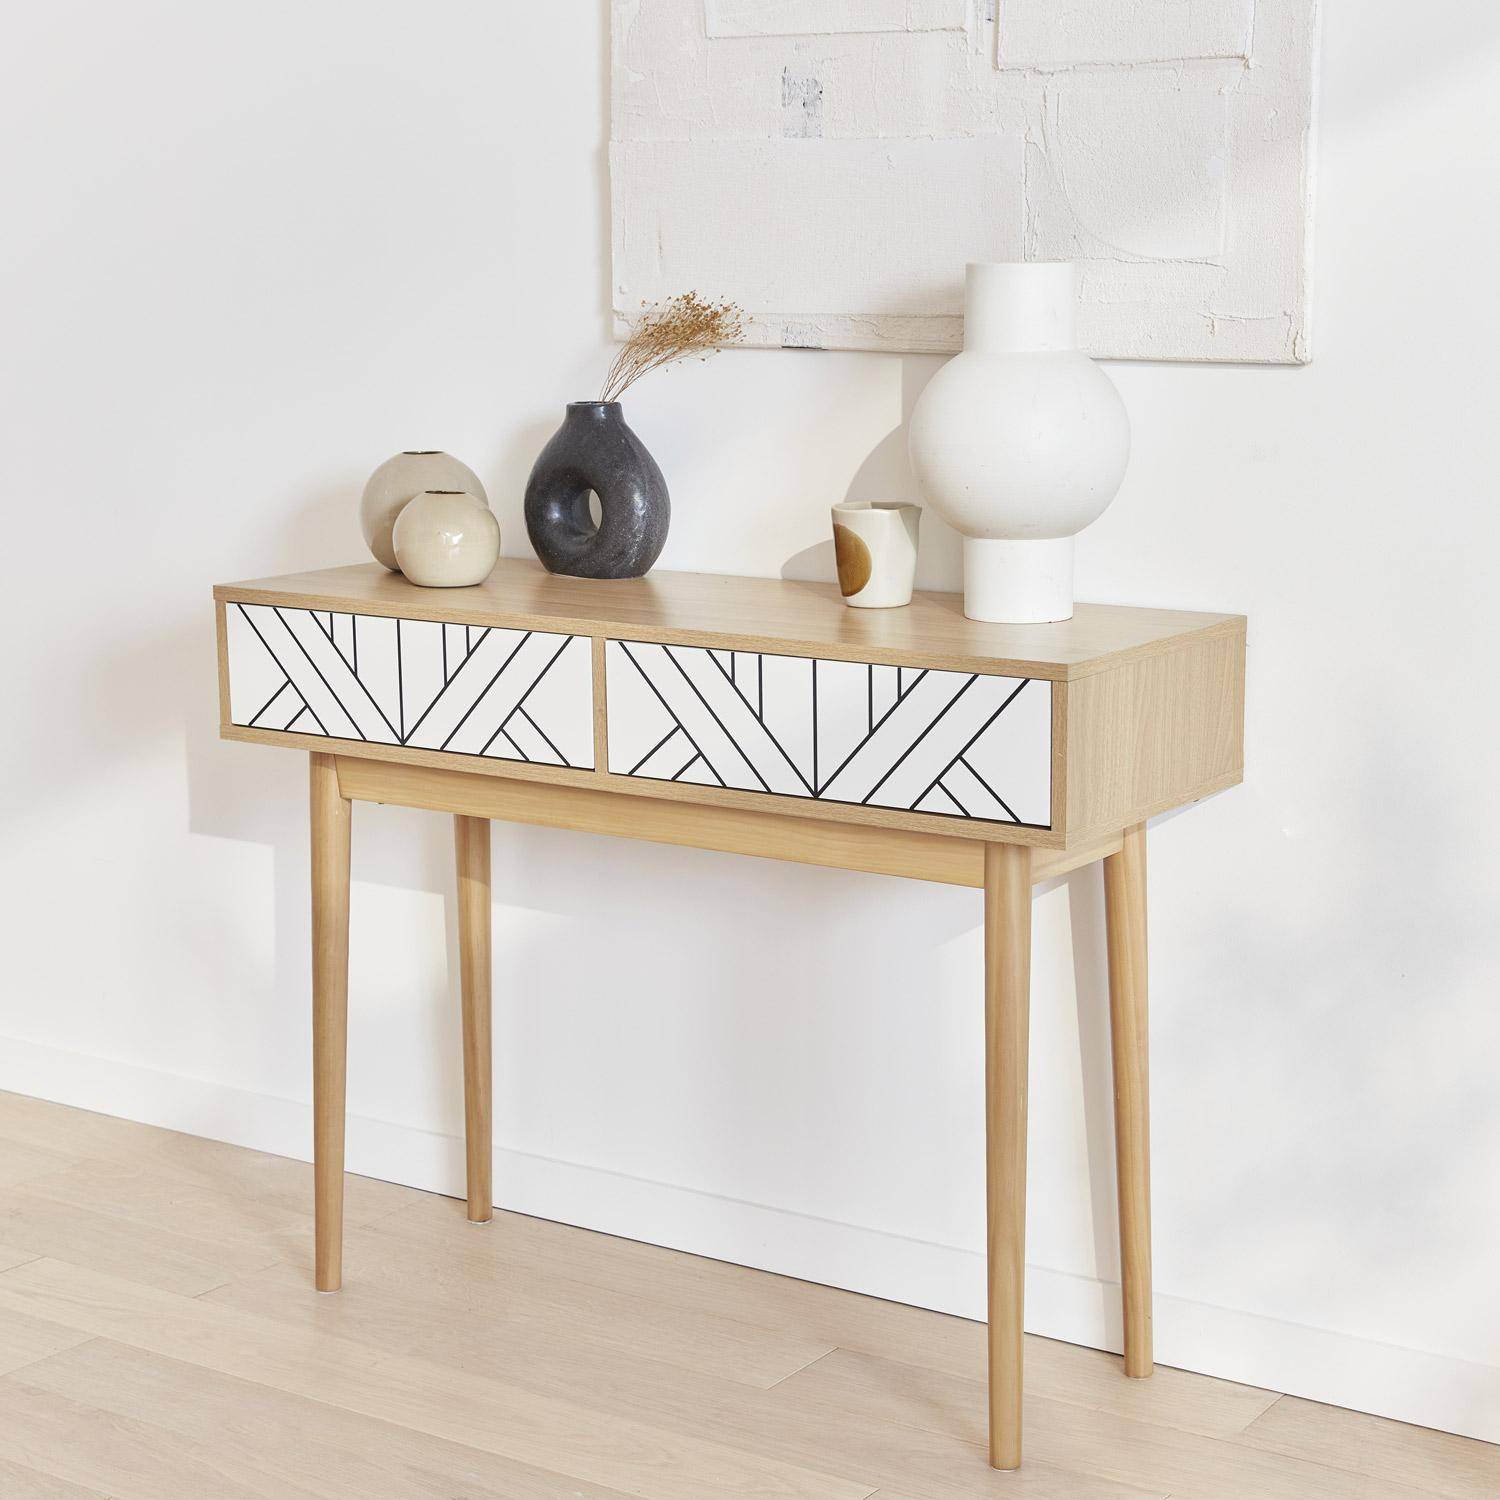 Wood-effect console table, 100x55x75cm, Mika, White Photo2